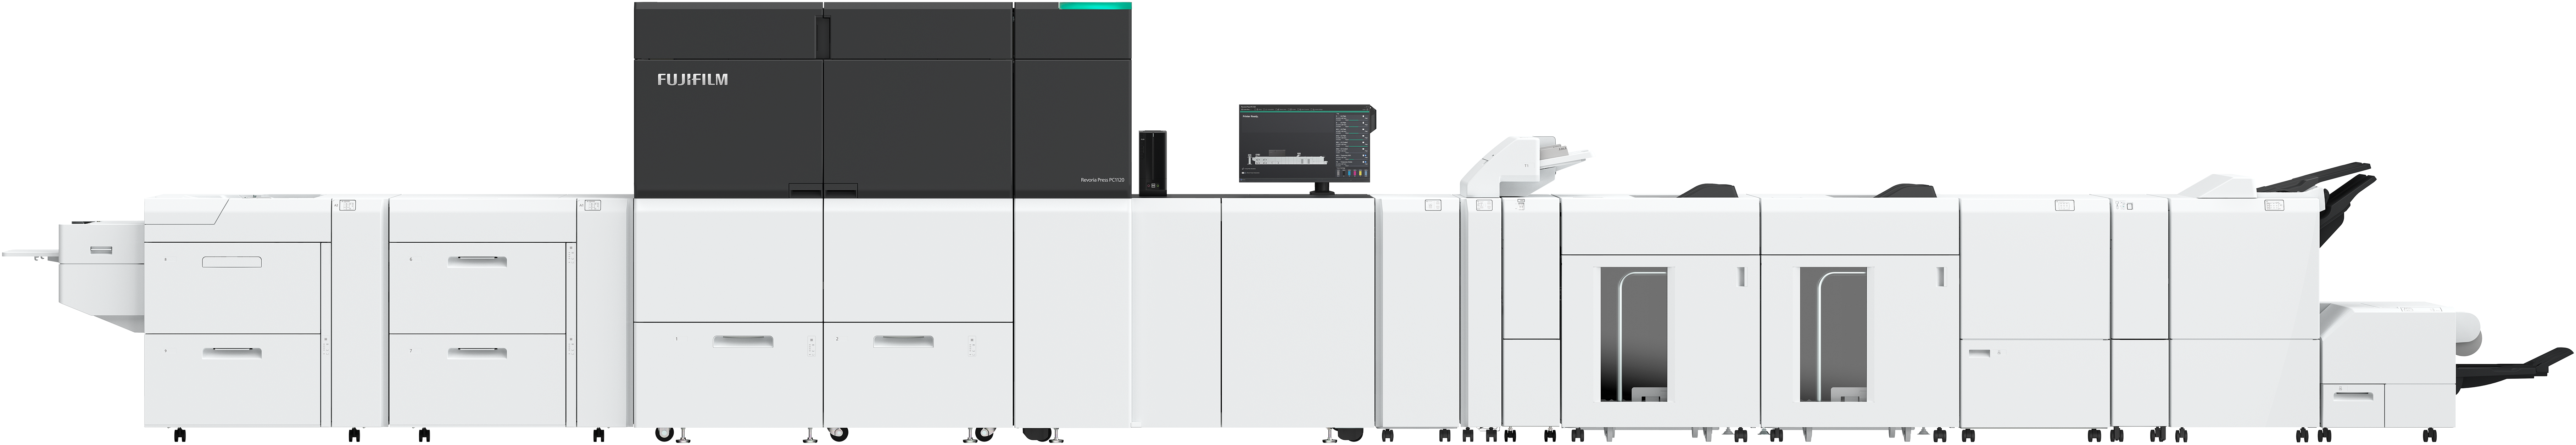 Fujifilm’s Graphic Communication Division Achieves Coveted Digital Press System Certifications from Idealliance